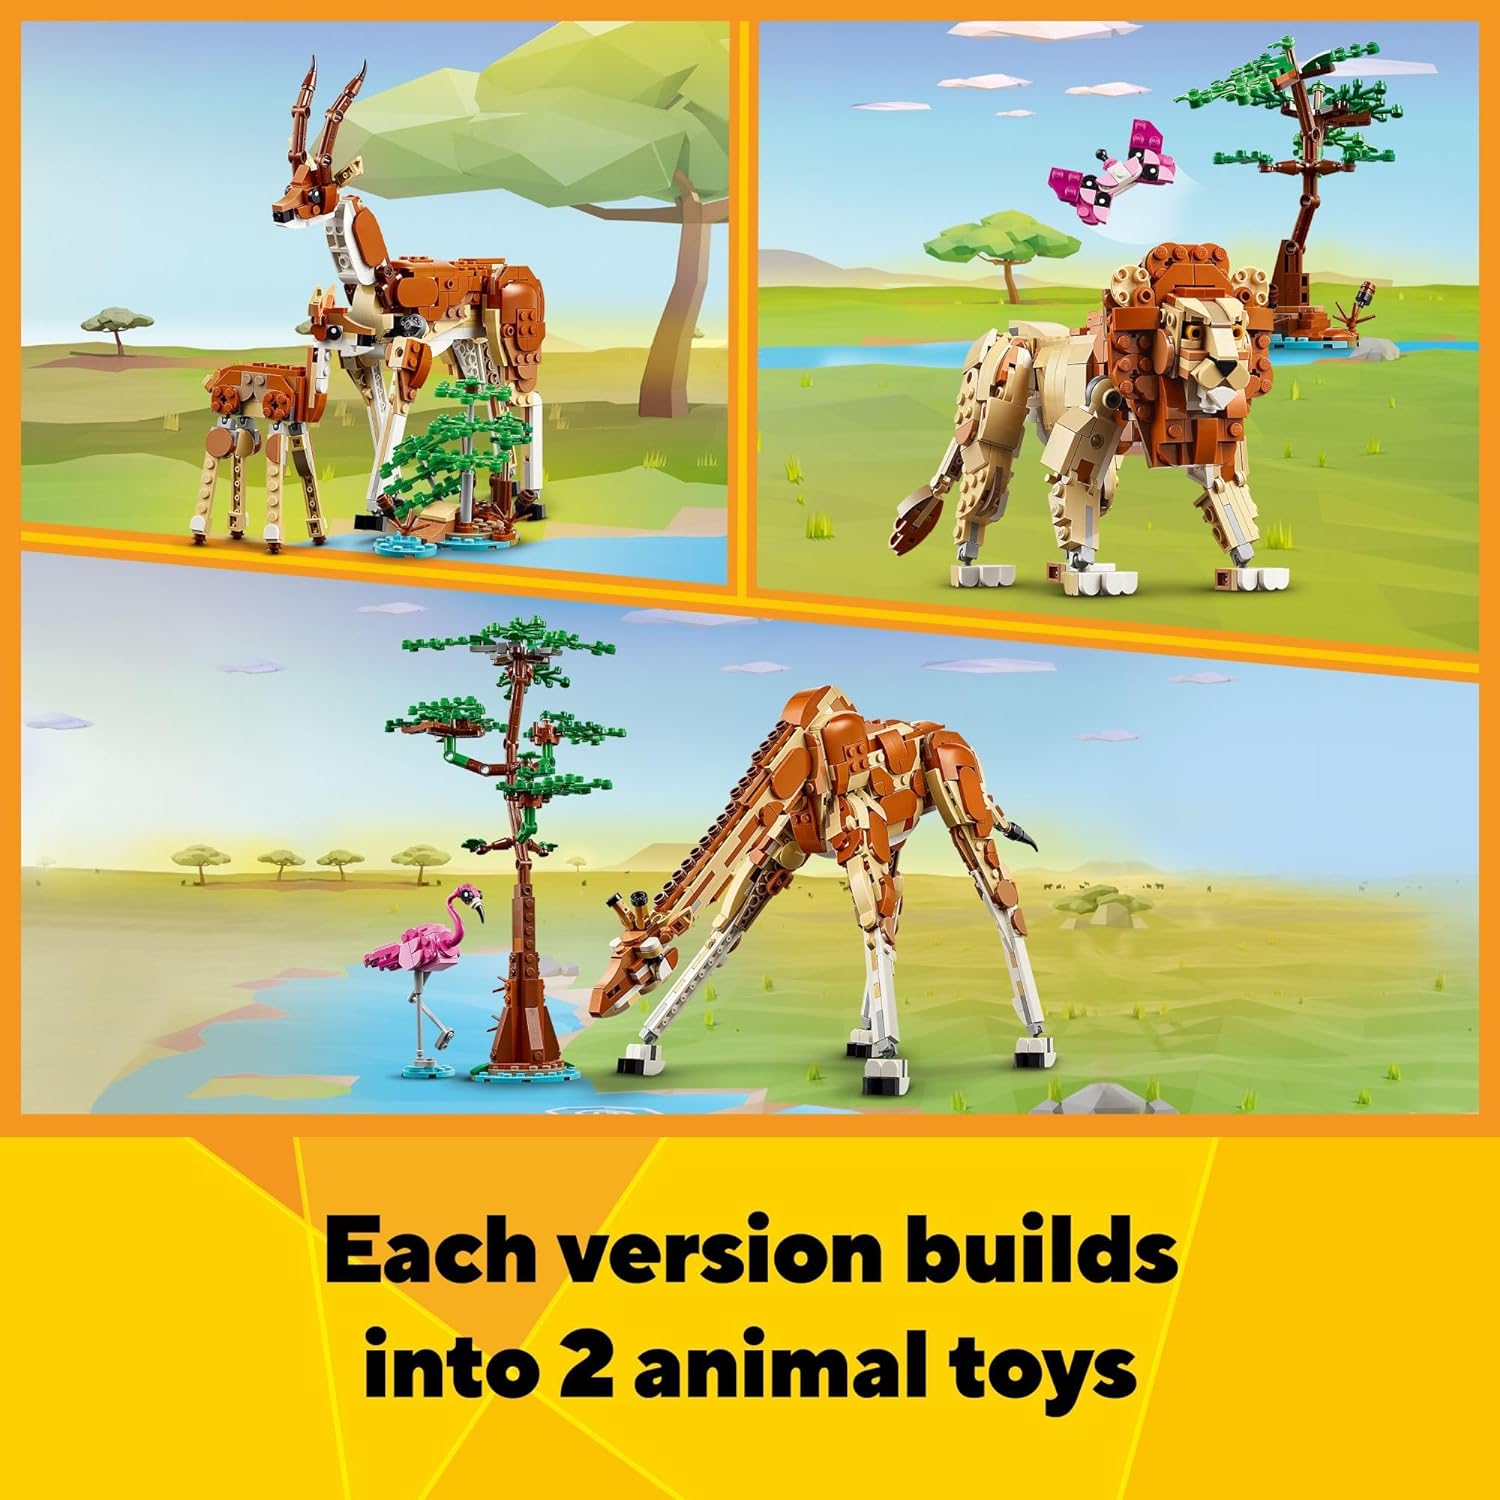 LEGO 31150 Creator 3 in 1 Wild Safari Animals, Rebuilds into 3 Different Safari Animal Figures - Giraffe Toy, Gazelle Toy or Lion Toy, Nature Toy, Building Set for Kids.